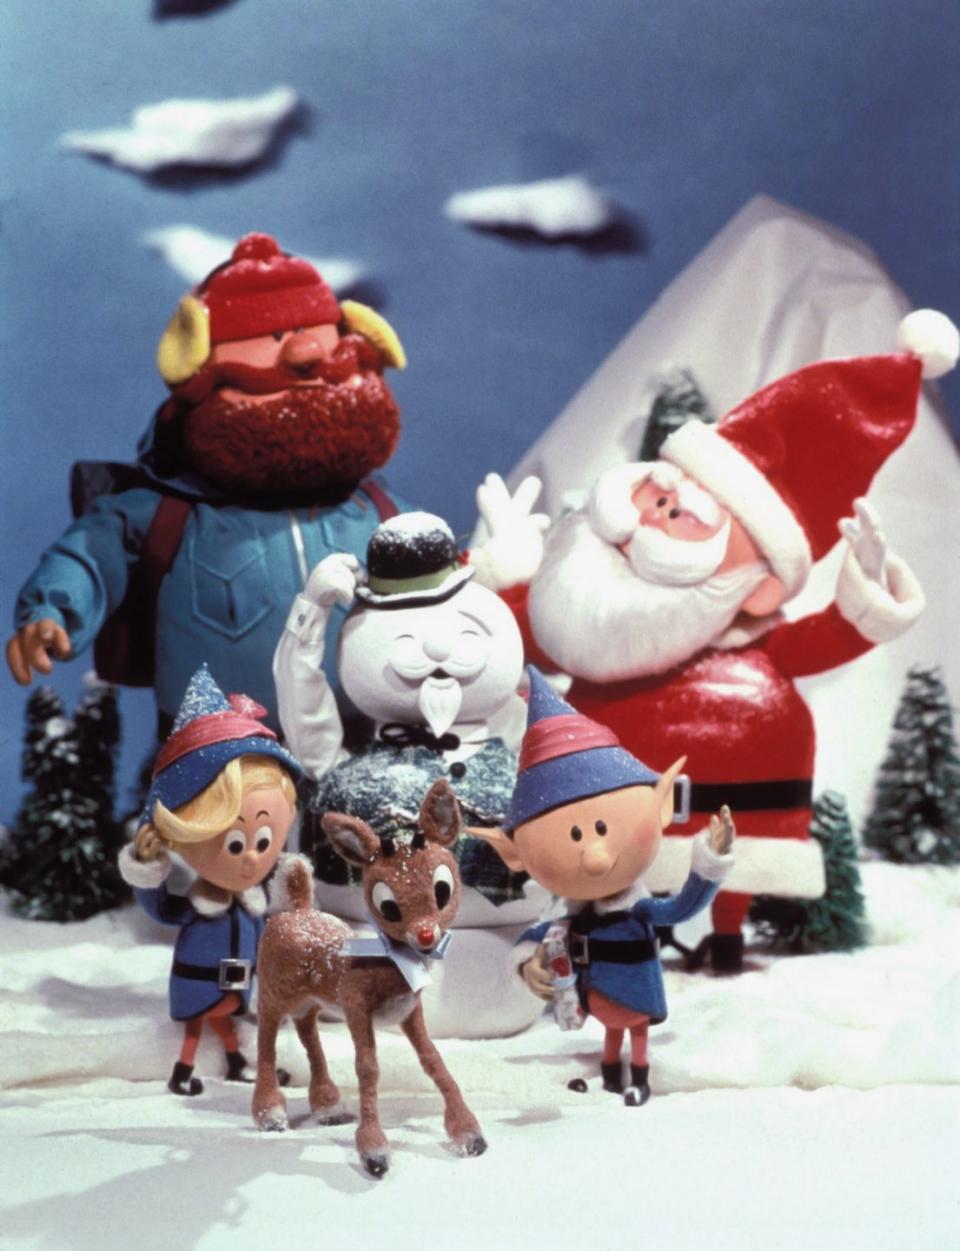 Rudolph the Red-Nosed Reindeer was voiced by a woman.